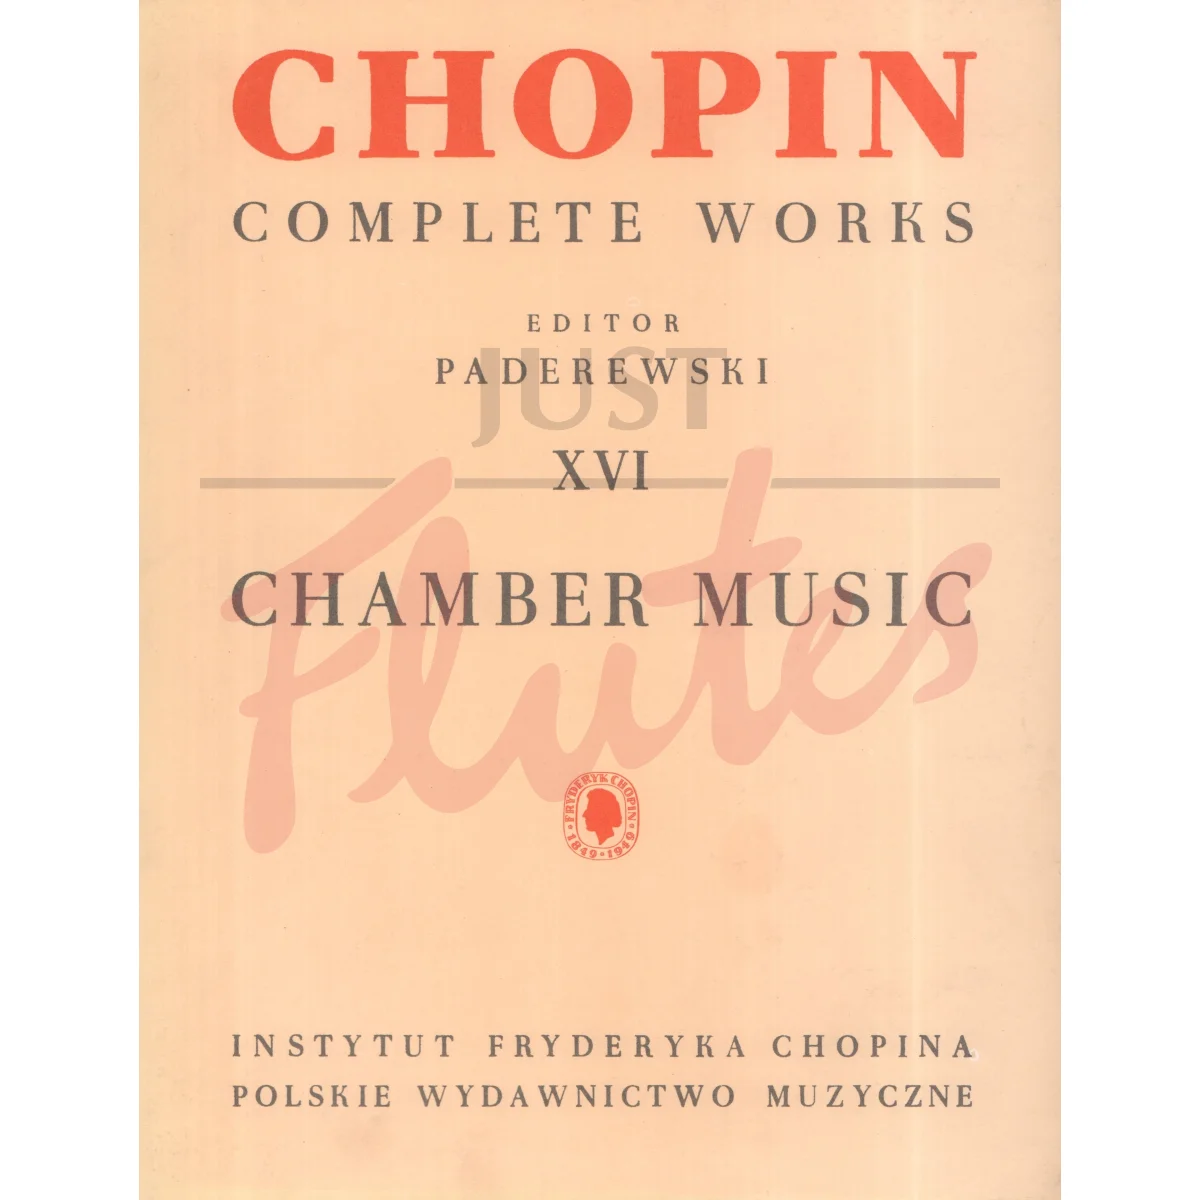 Chamber Music for Mixed Chamber Group